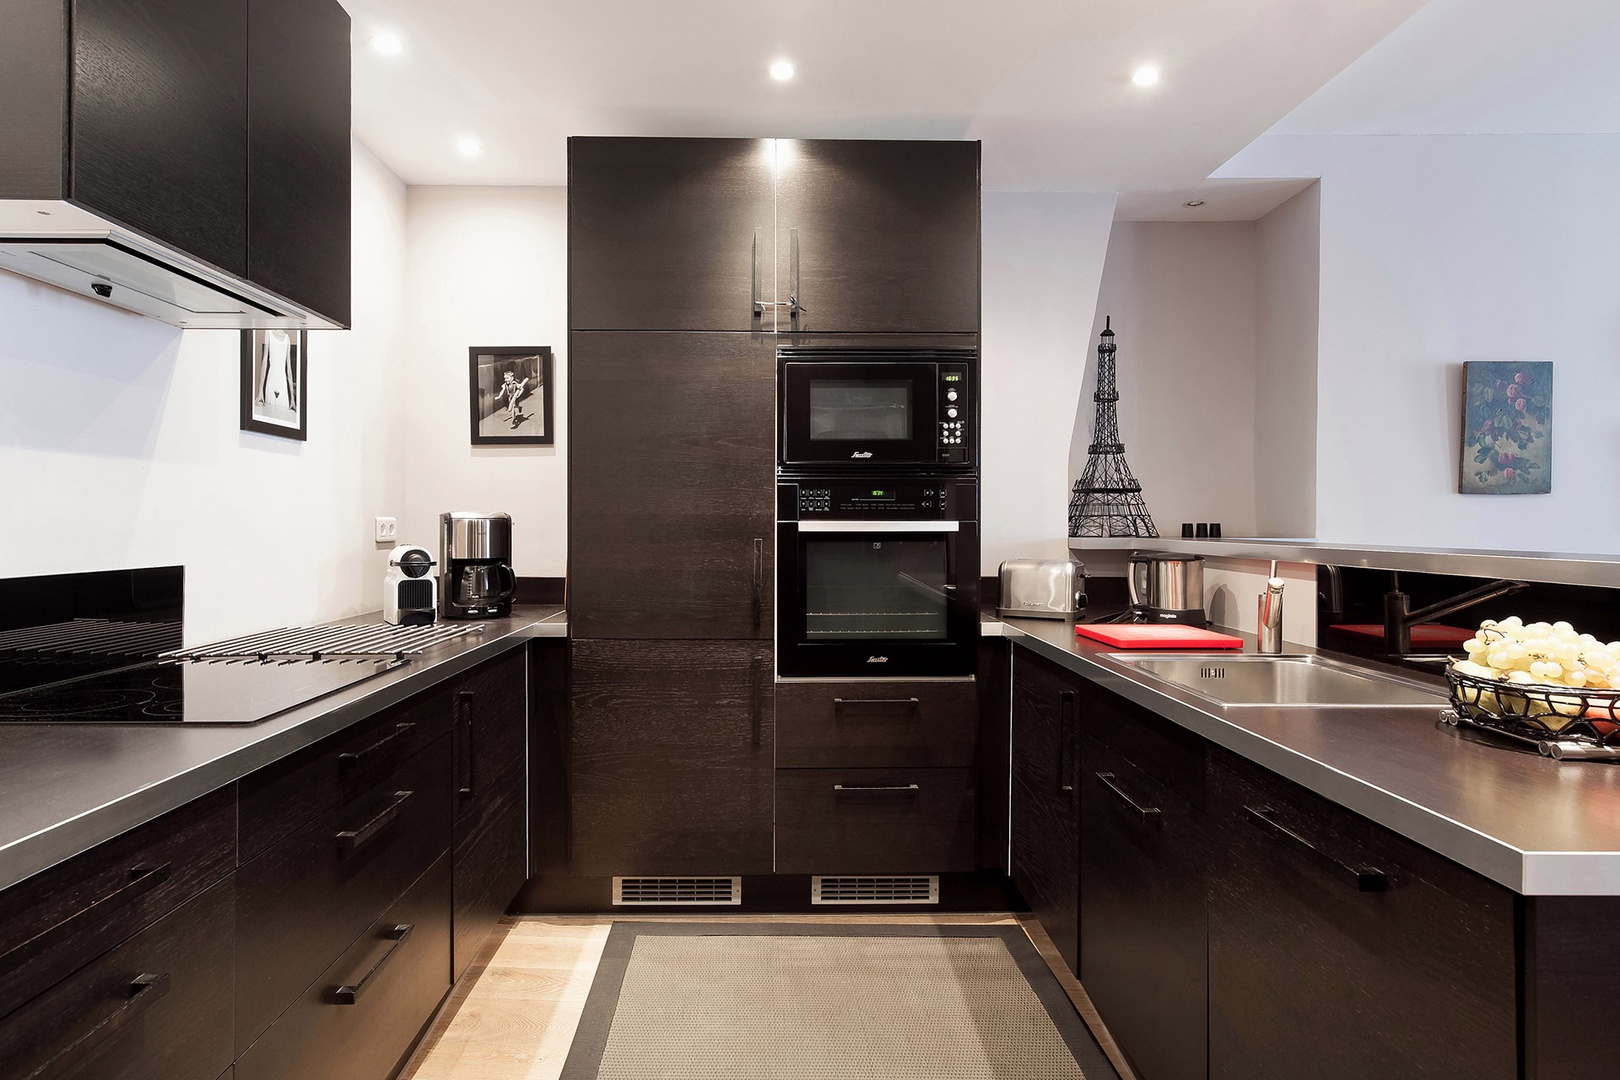 The kitchen will delight chefs with its gorgeous finishes and top-of-the-line appliances.